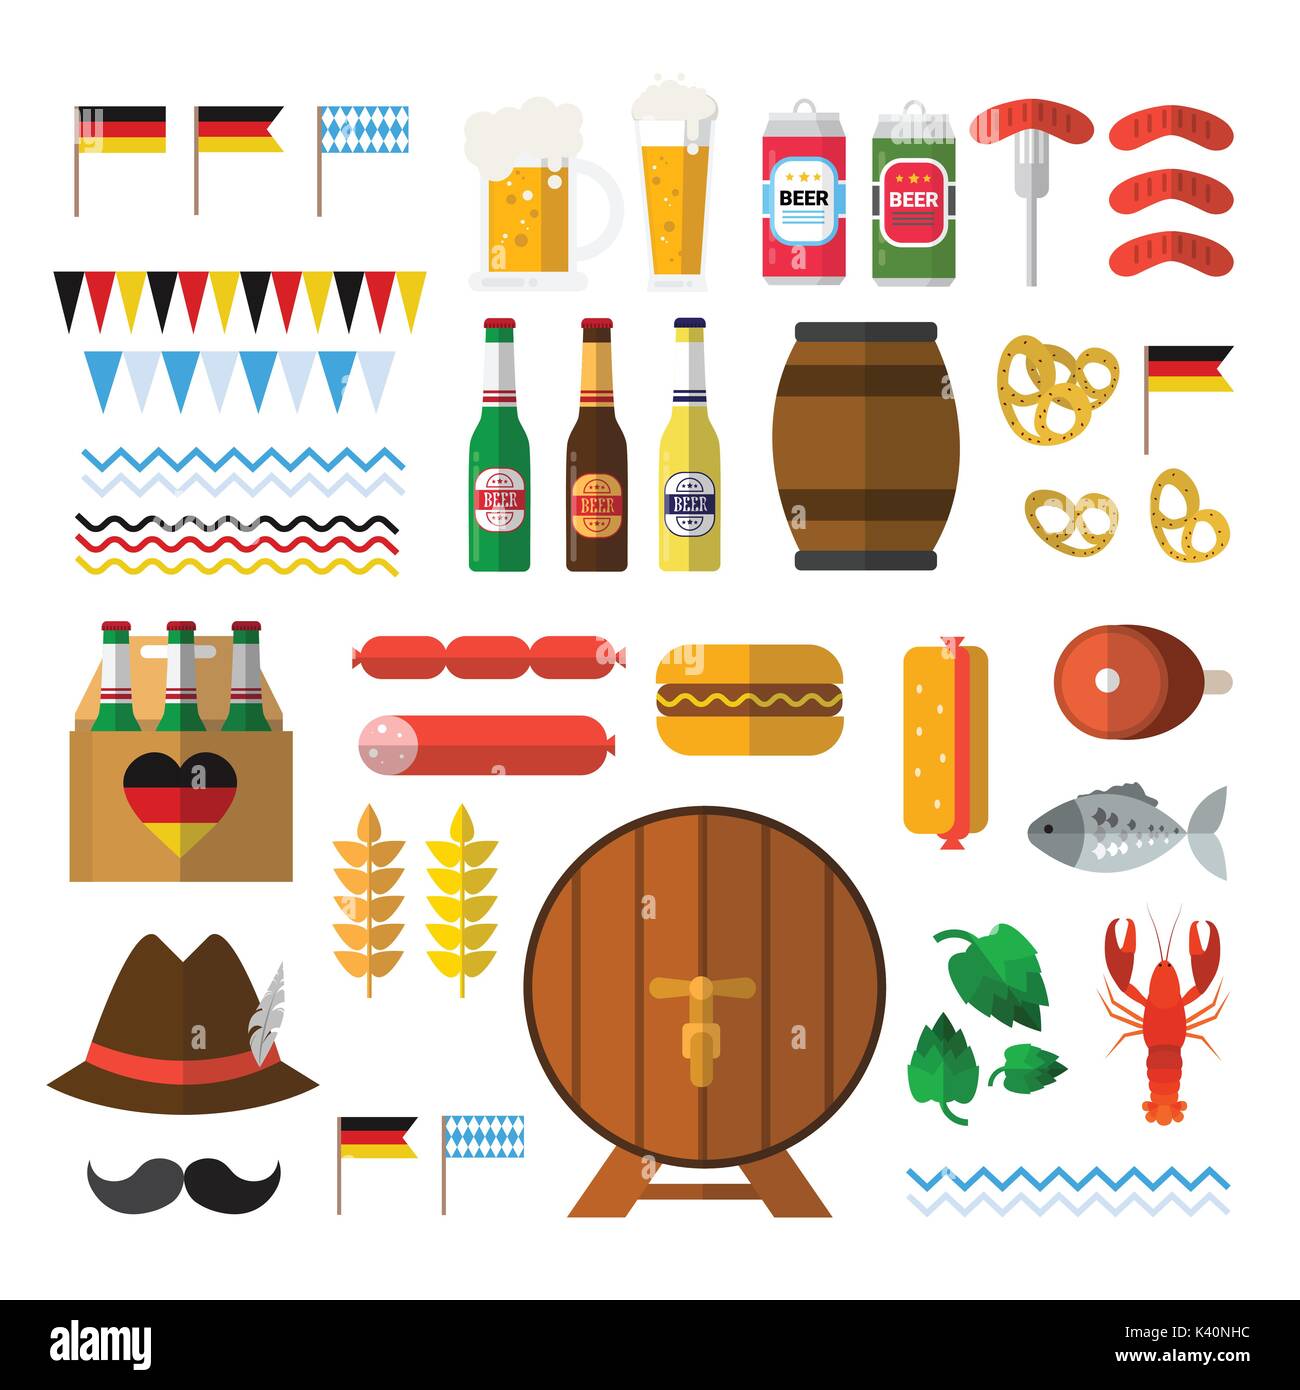 Beer Festival Icons Set Oktoberfest Holiday Concept Collection Stock Vector